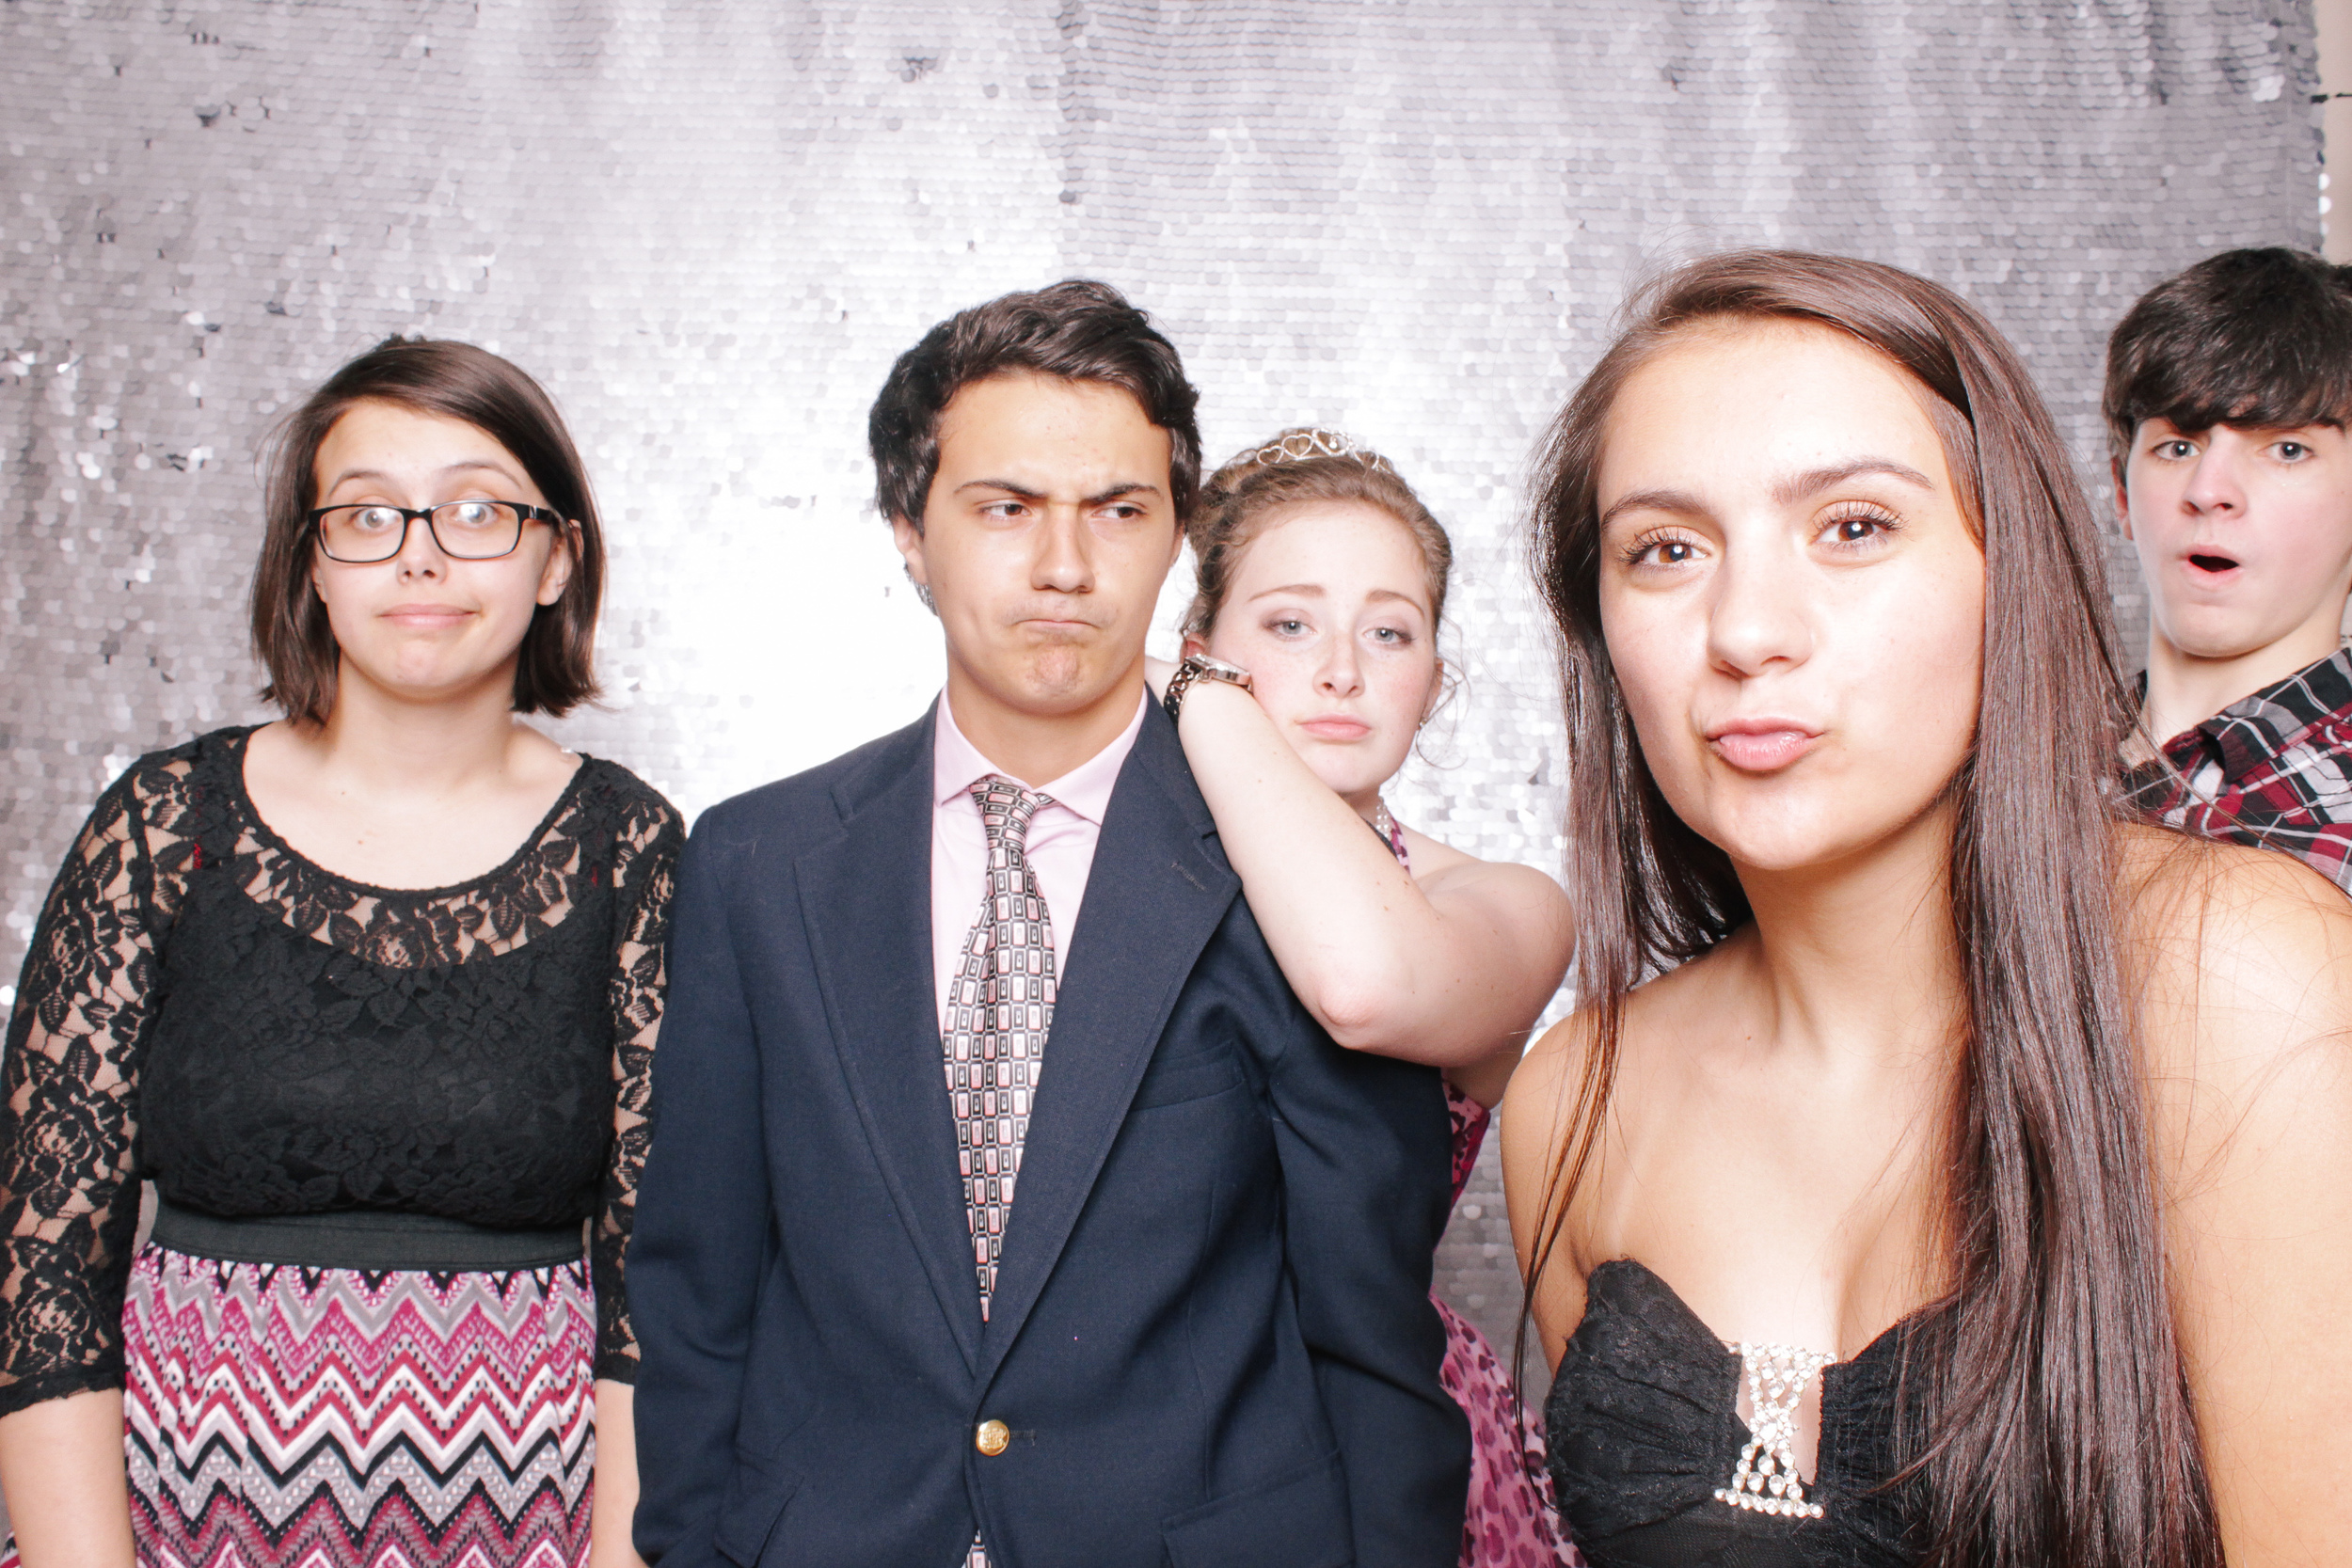 00159-Megs Sweet 16 Birthday Photo Booth in Cleveland-20150418.jpg